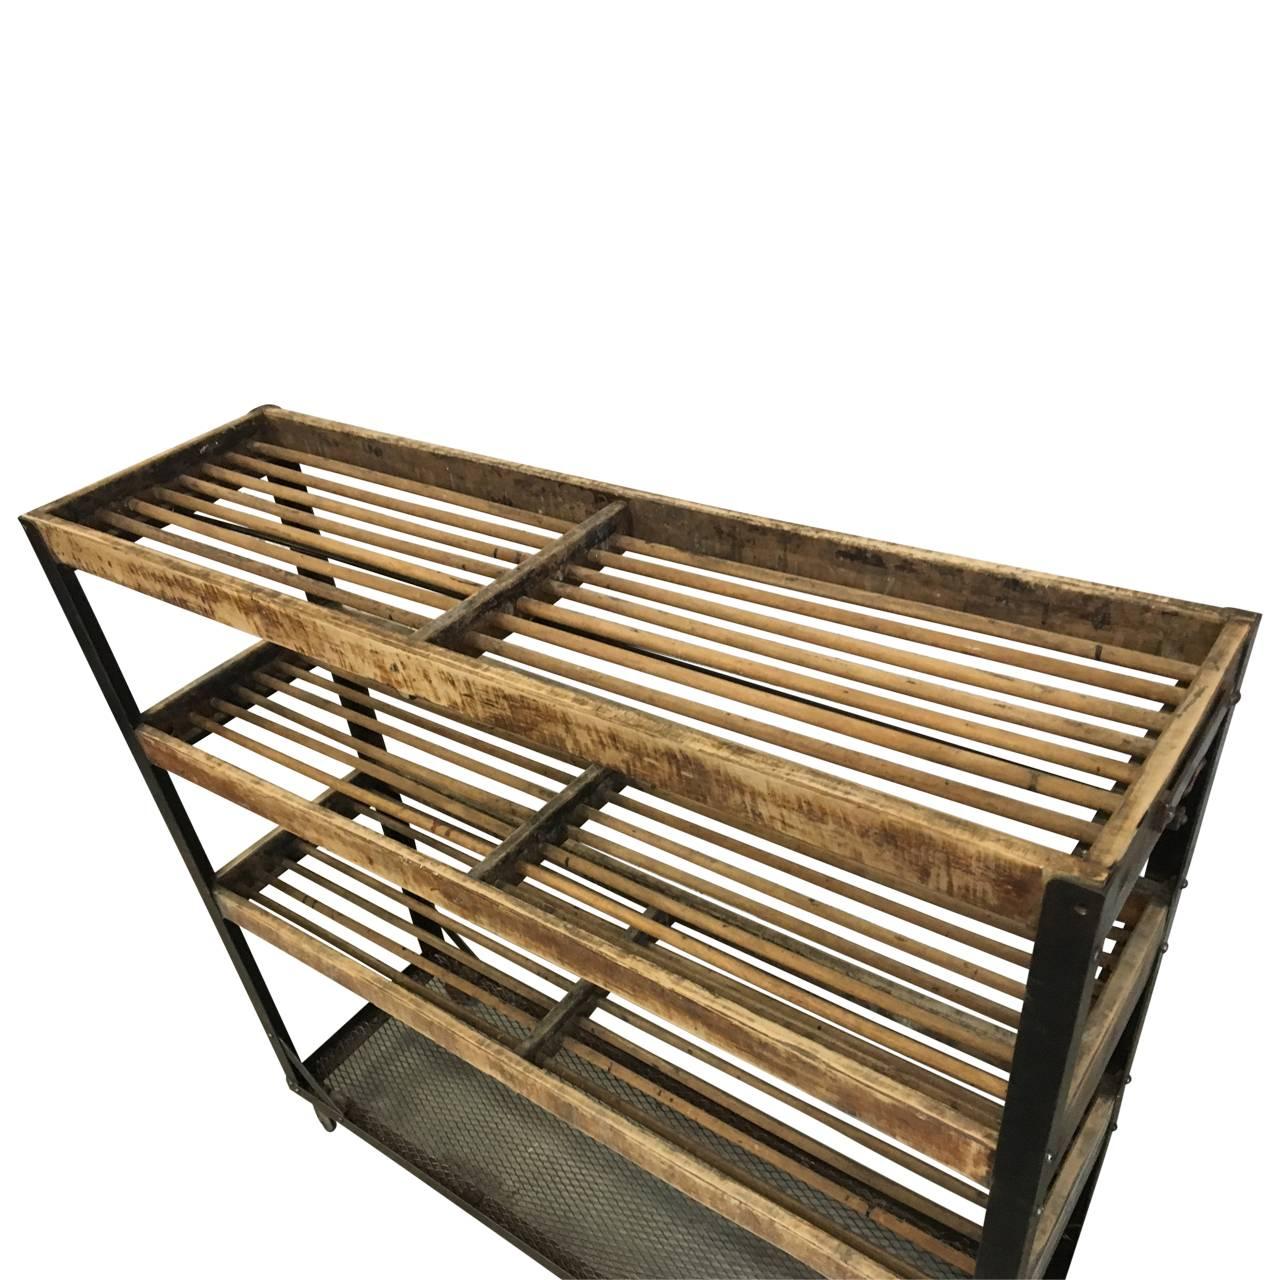 Industrial steel cart with two wooden shelves.